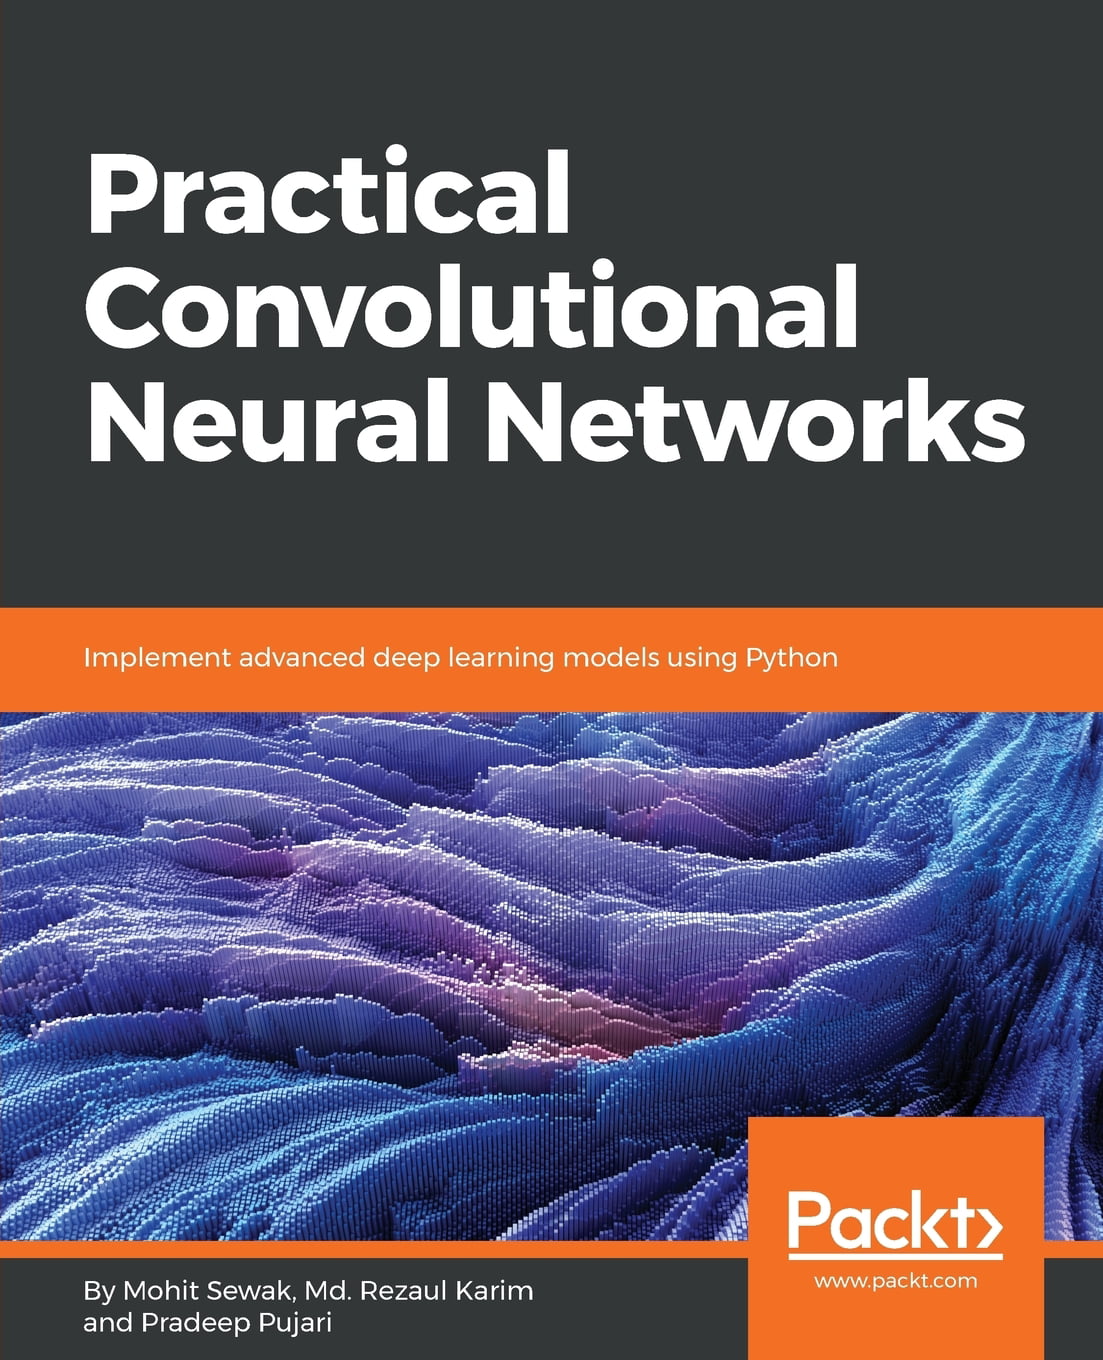 books about neural networks